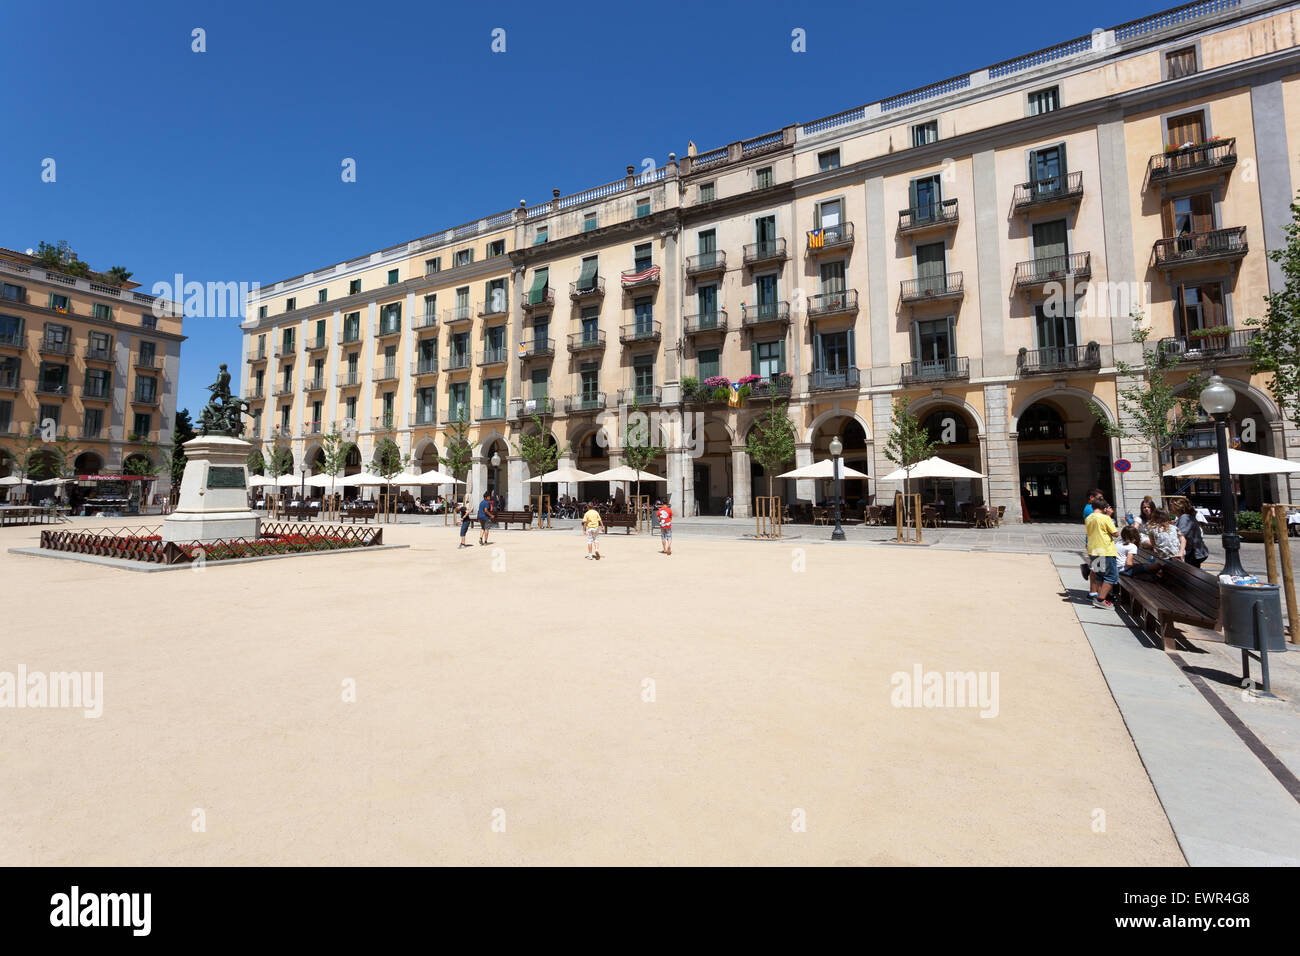 Plaza de la Independencia, square in the old town of Girona, Catalonia, Spain Stock Photo